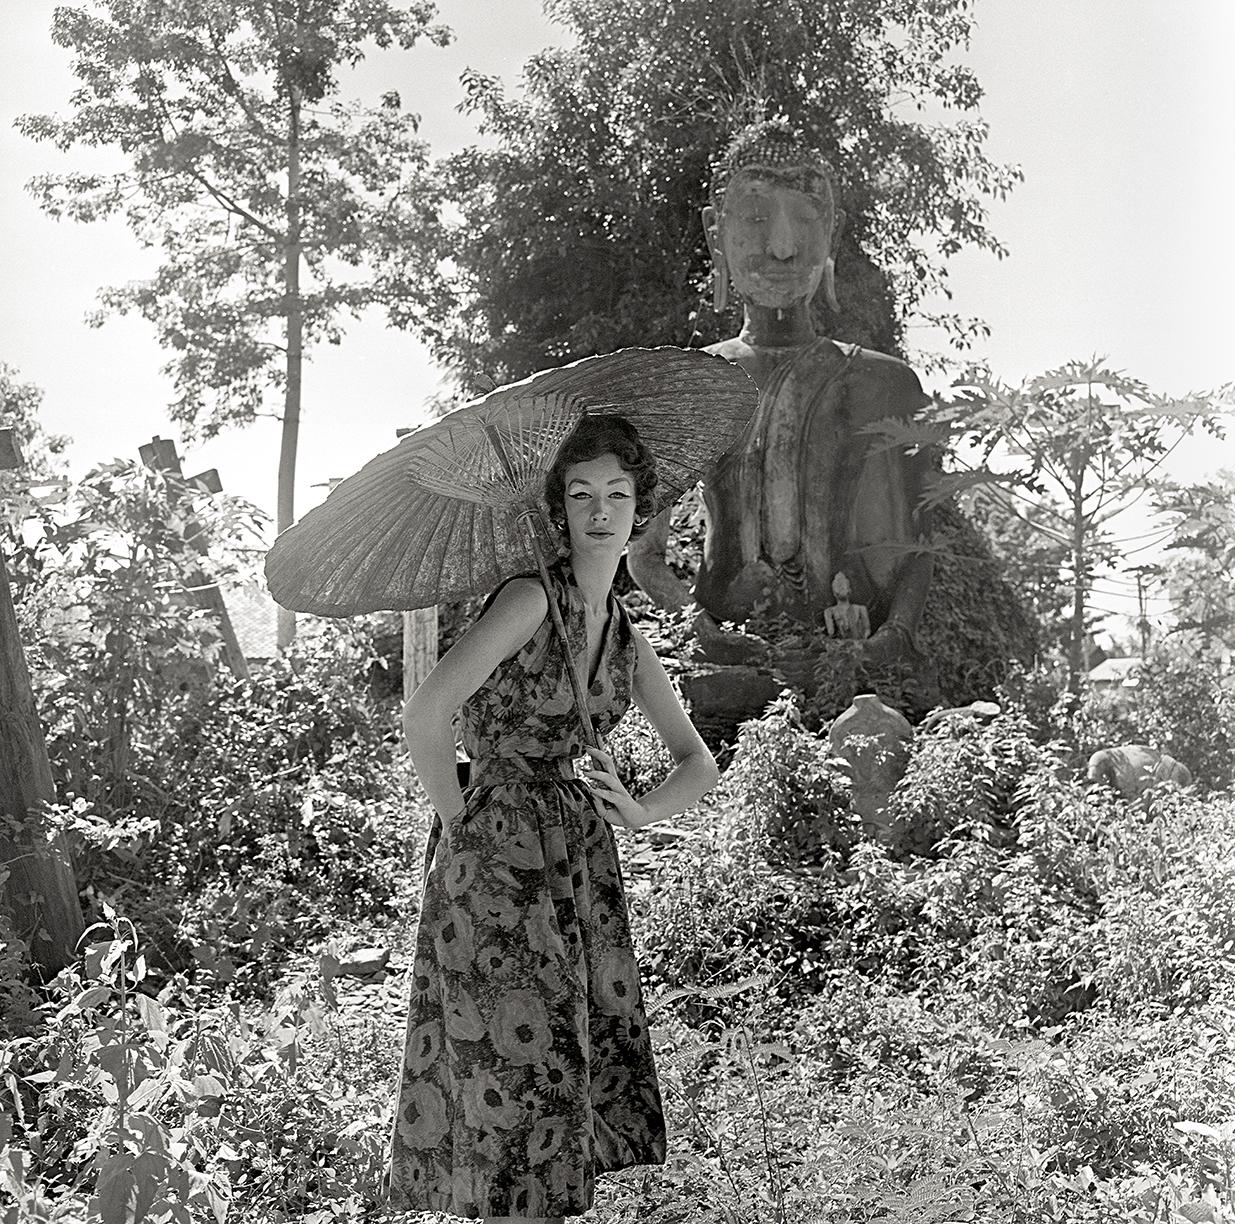 Selected from the Derujinsky: Around The World Portfolio, shot in The Garden Of Buddhas, Aythutthaya in Thailand, for Harper's Bazaar

Artist: Gleb Derujinsky

Title: Garden Of Buddhas

Year: 1957

Estate Edition: signed, stamped and numbered on